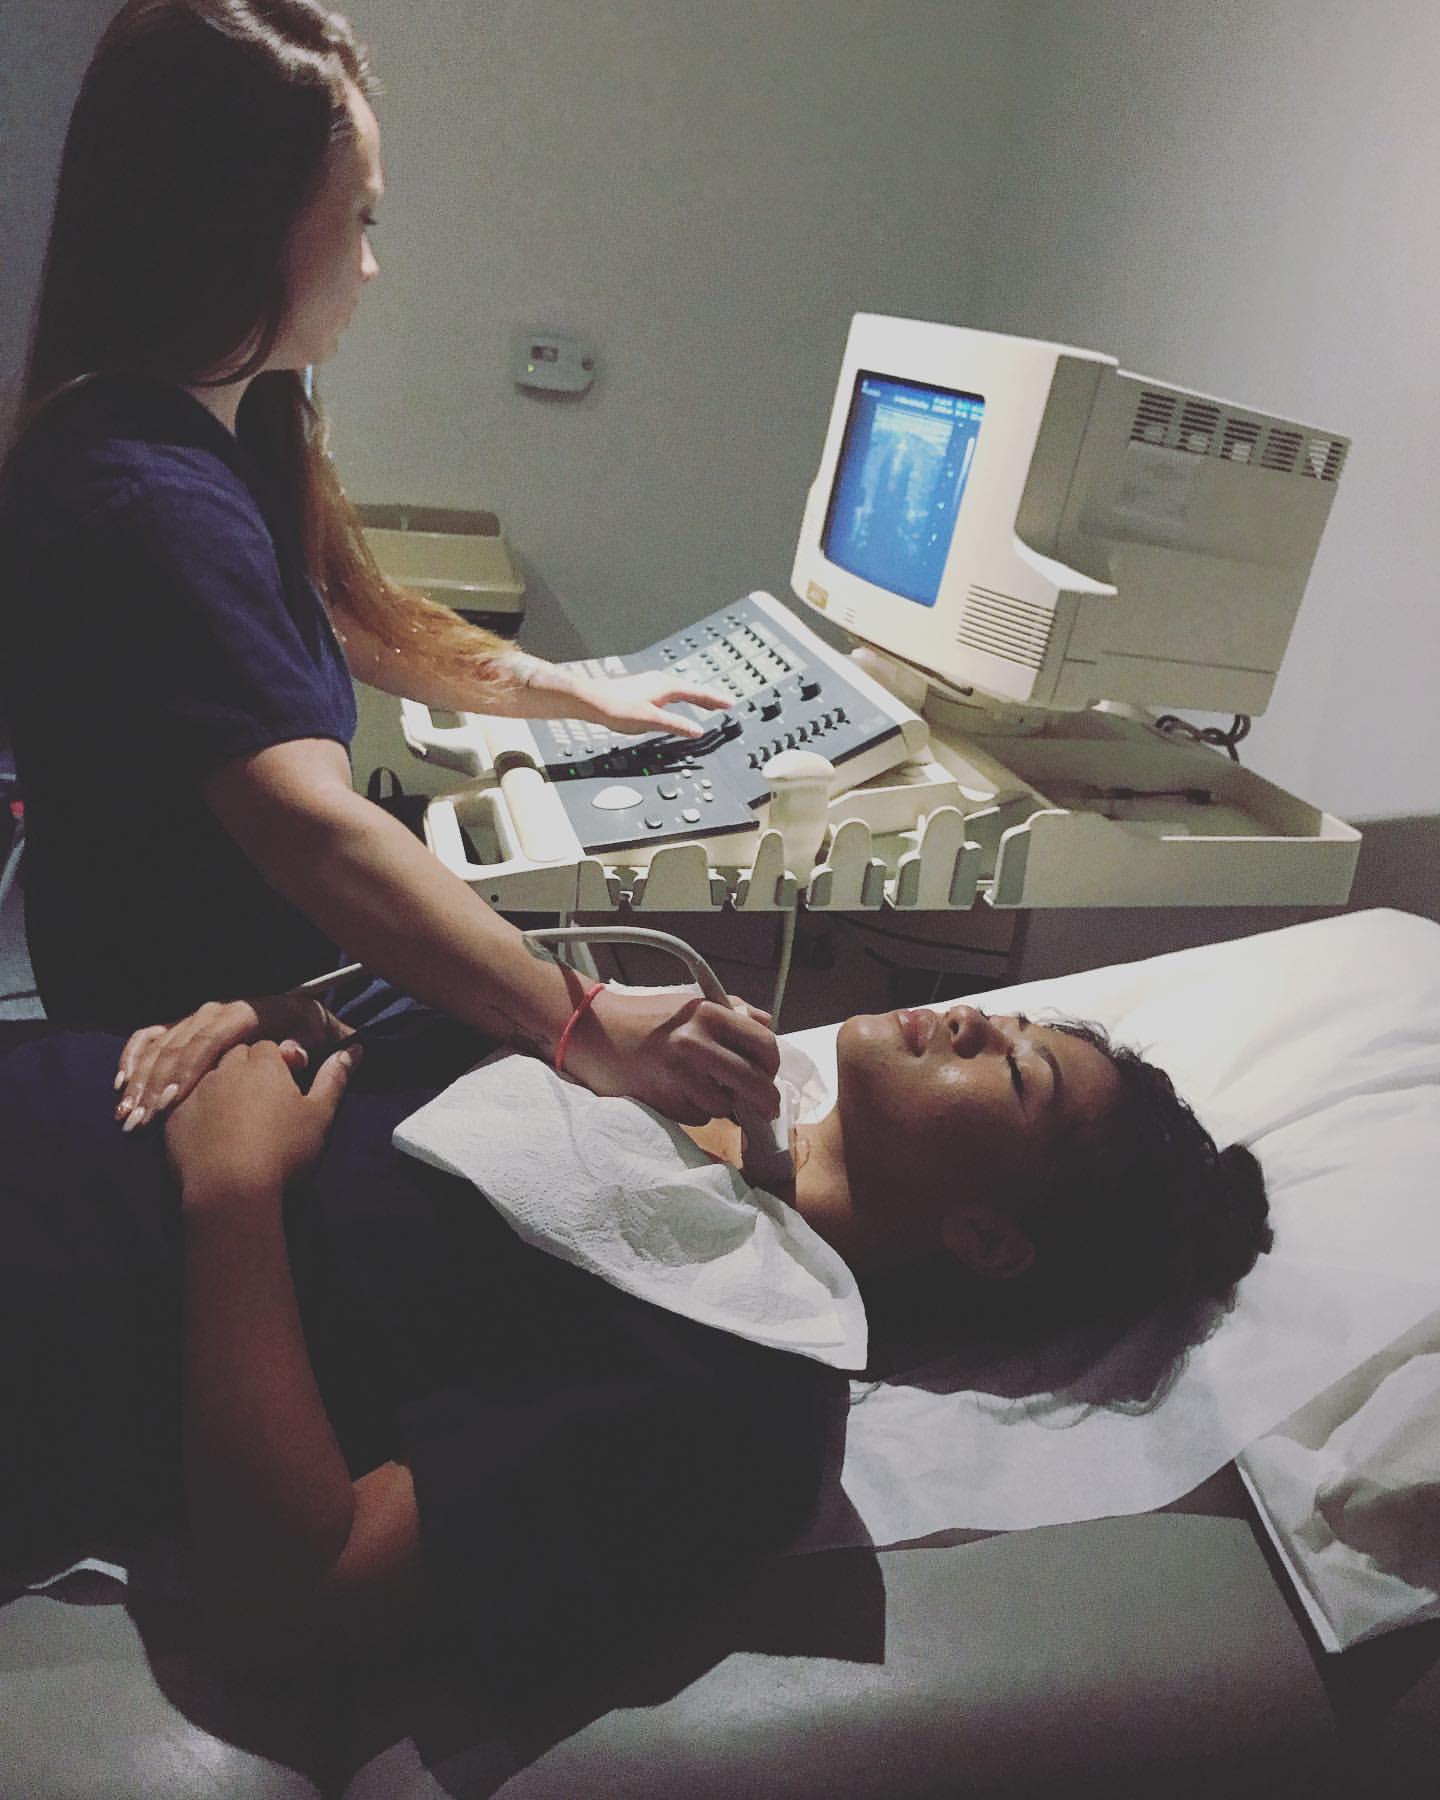 MTS has been a prime choice for ultrasound tech school in Orange County